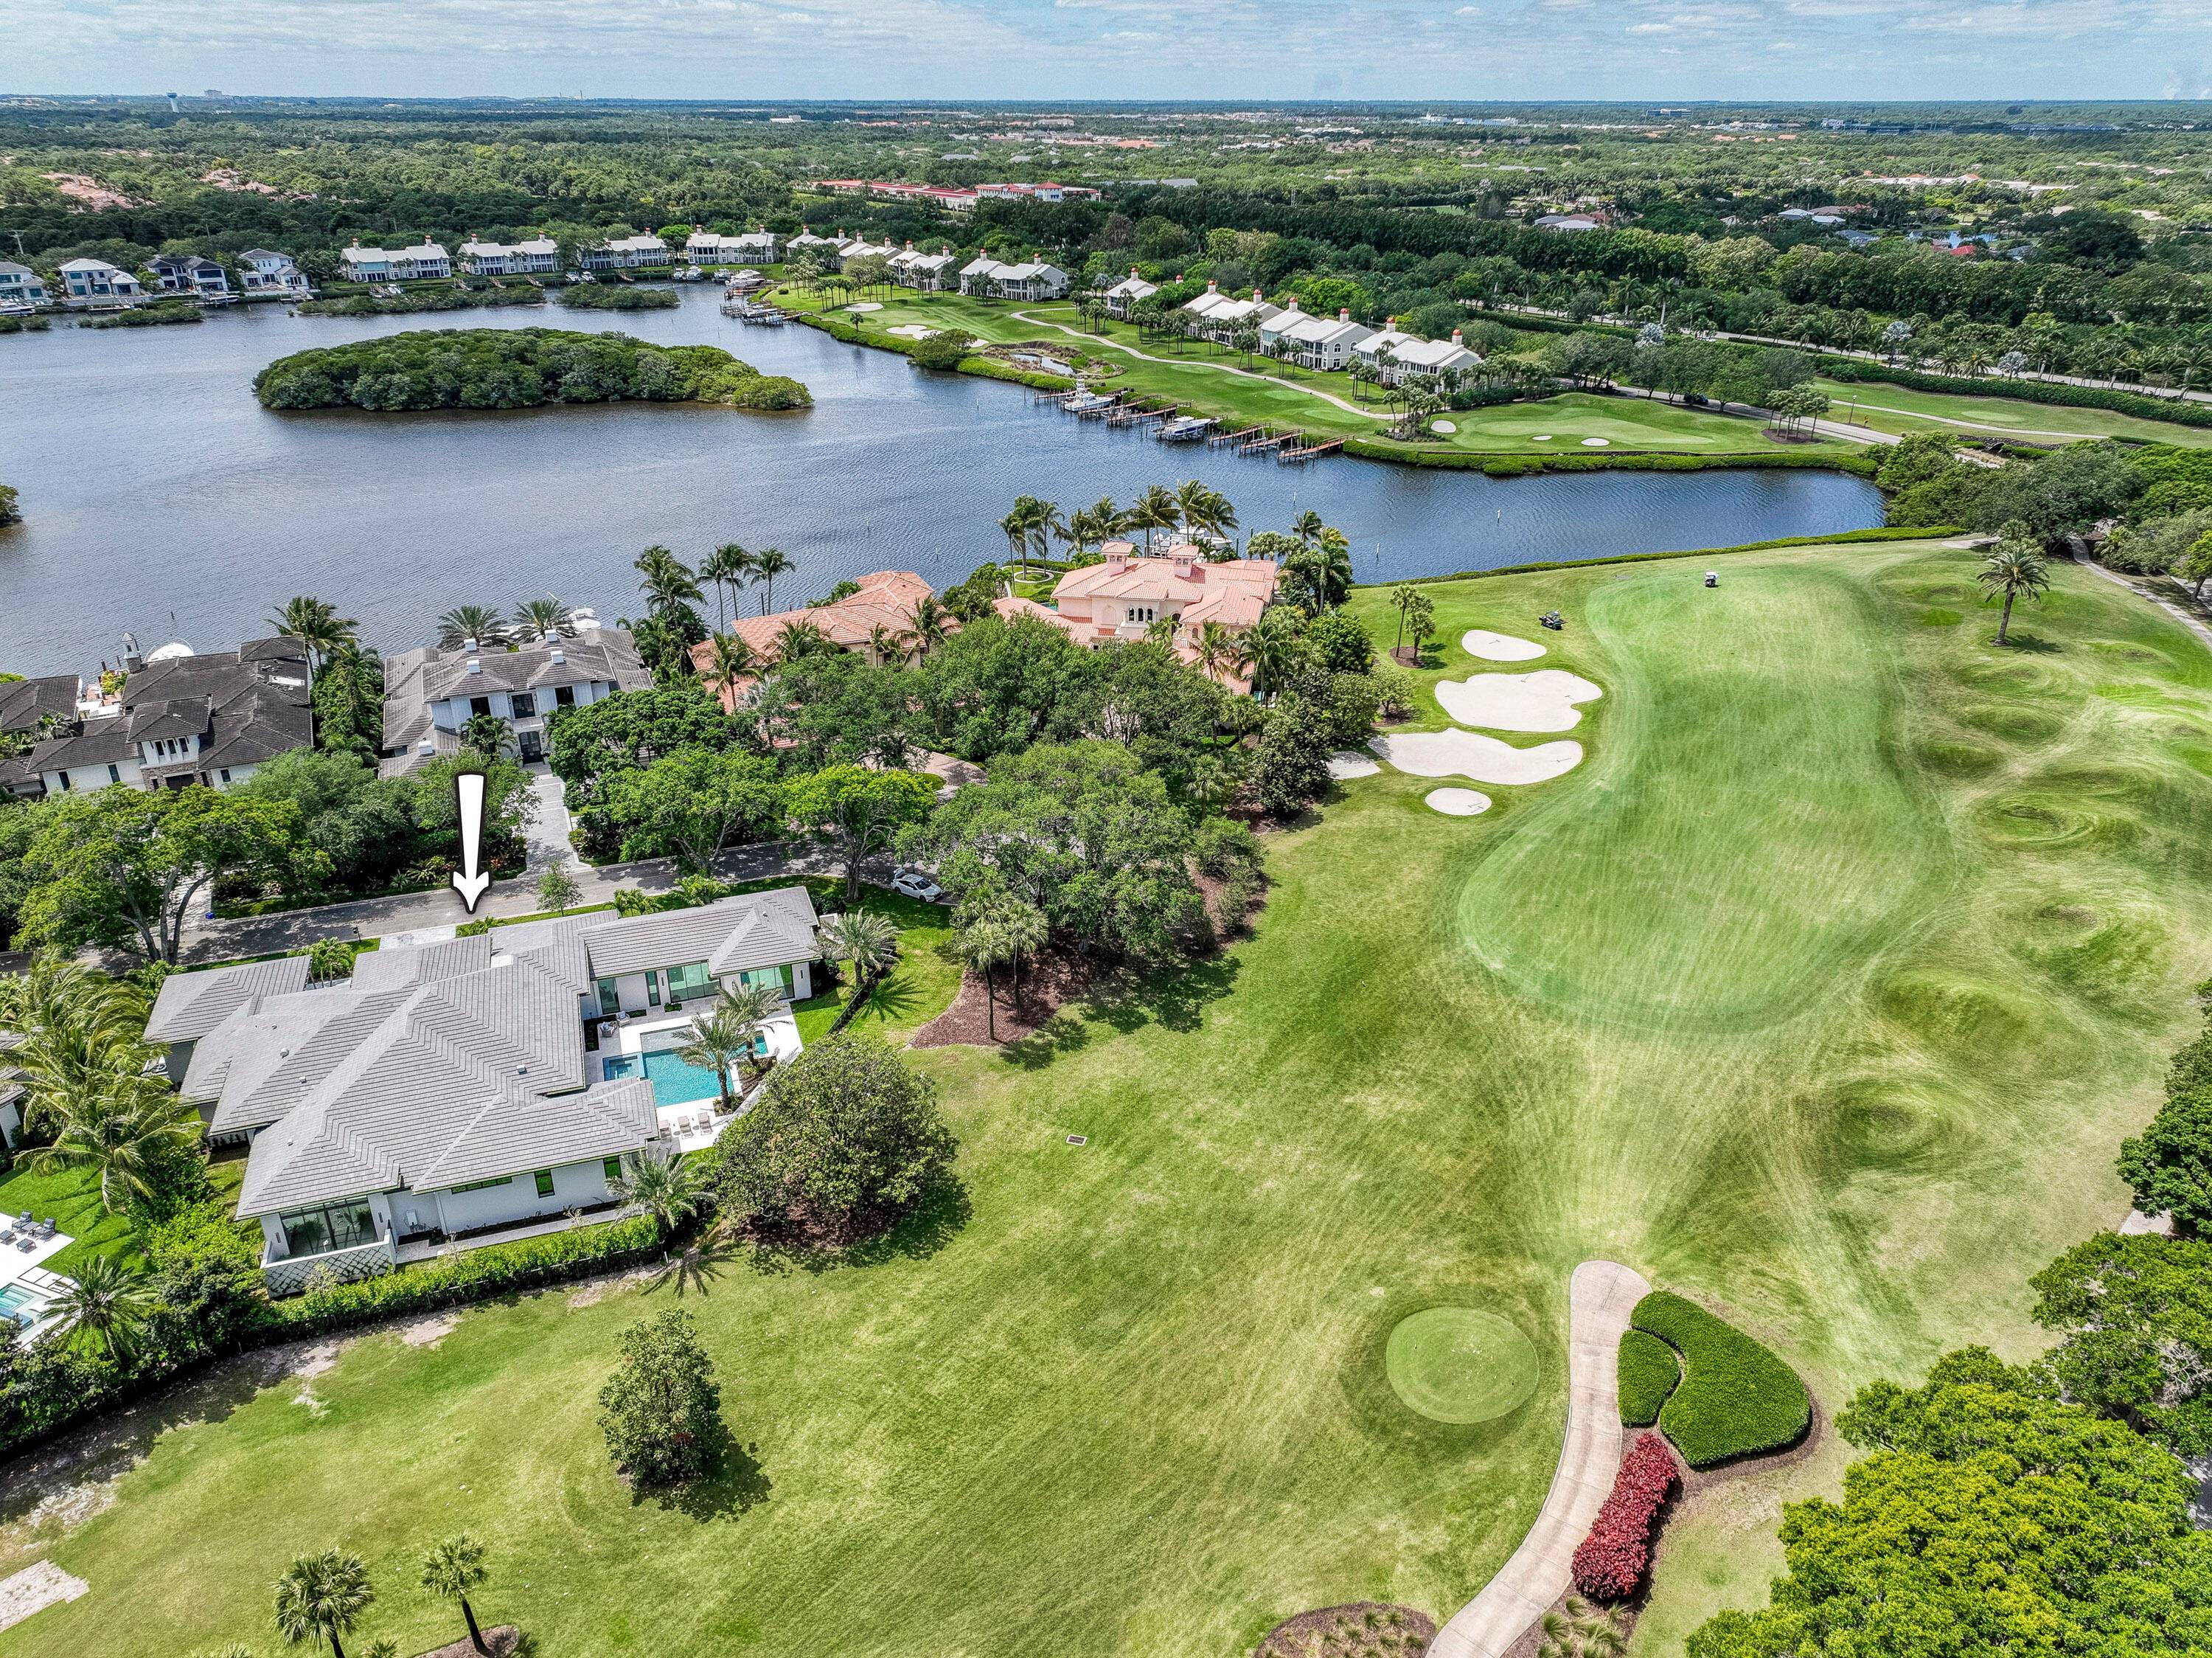 An exceptional property on a premium golf course location within the world renowned Admirals Cove.